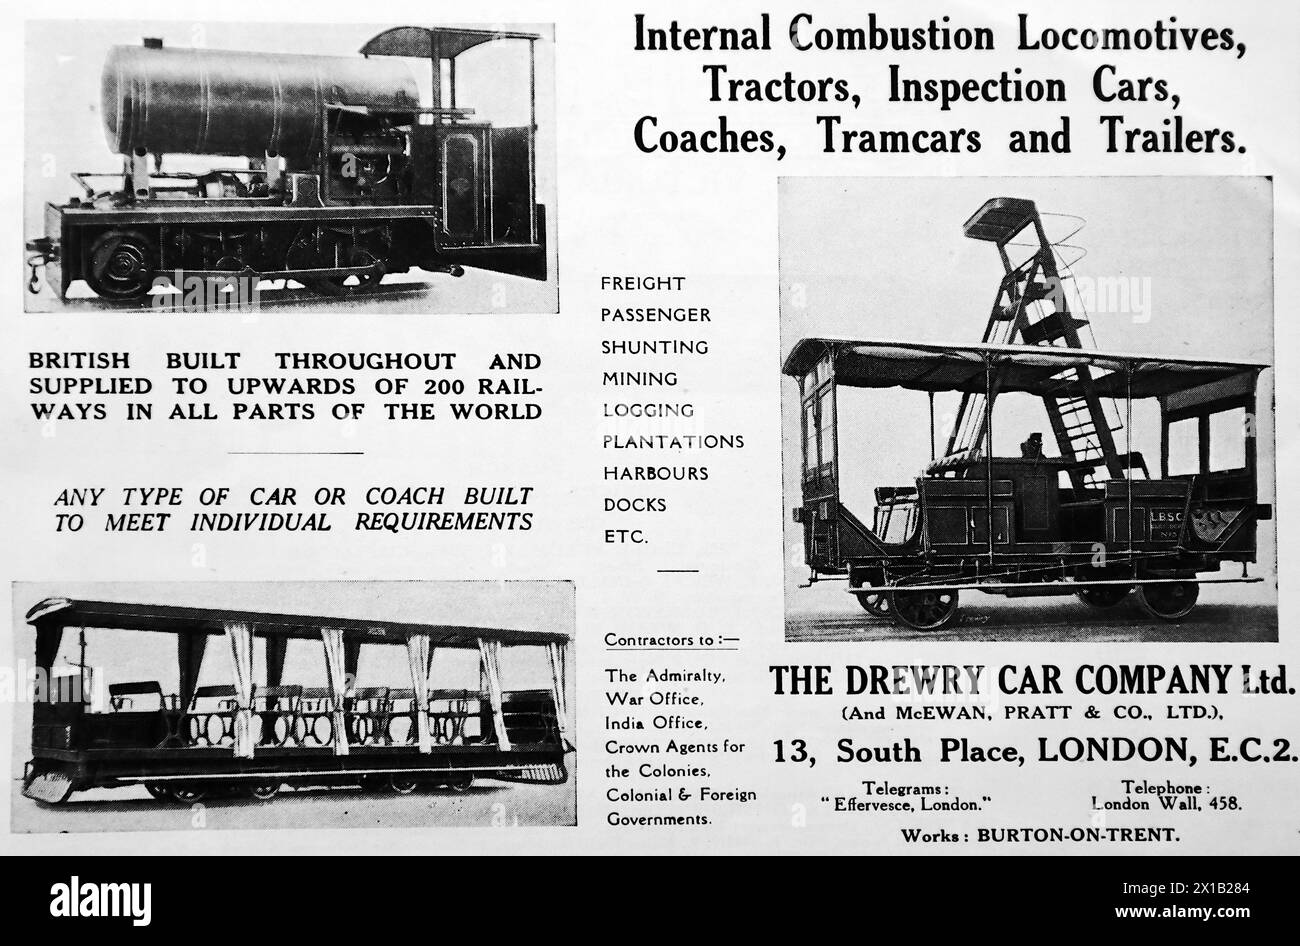 Advertisement for The Drewry Car Company Ltd (and McEwan Pratt & Co. Ltd) of London and Burton-on-Trent. Internal combustion locomotives, tractors, inspection cars, coaches, tramcars and trailers. From an original publication dated 15 May 1924, this helps to give an insight into public transport, and the railways in particular, of the 1920s. Stock Photo